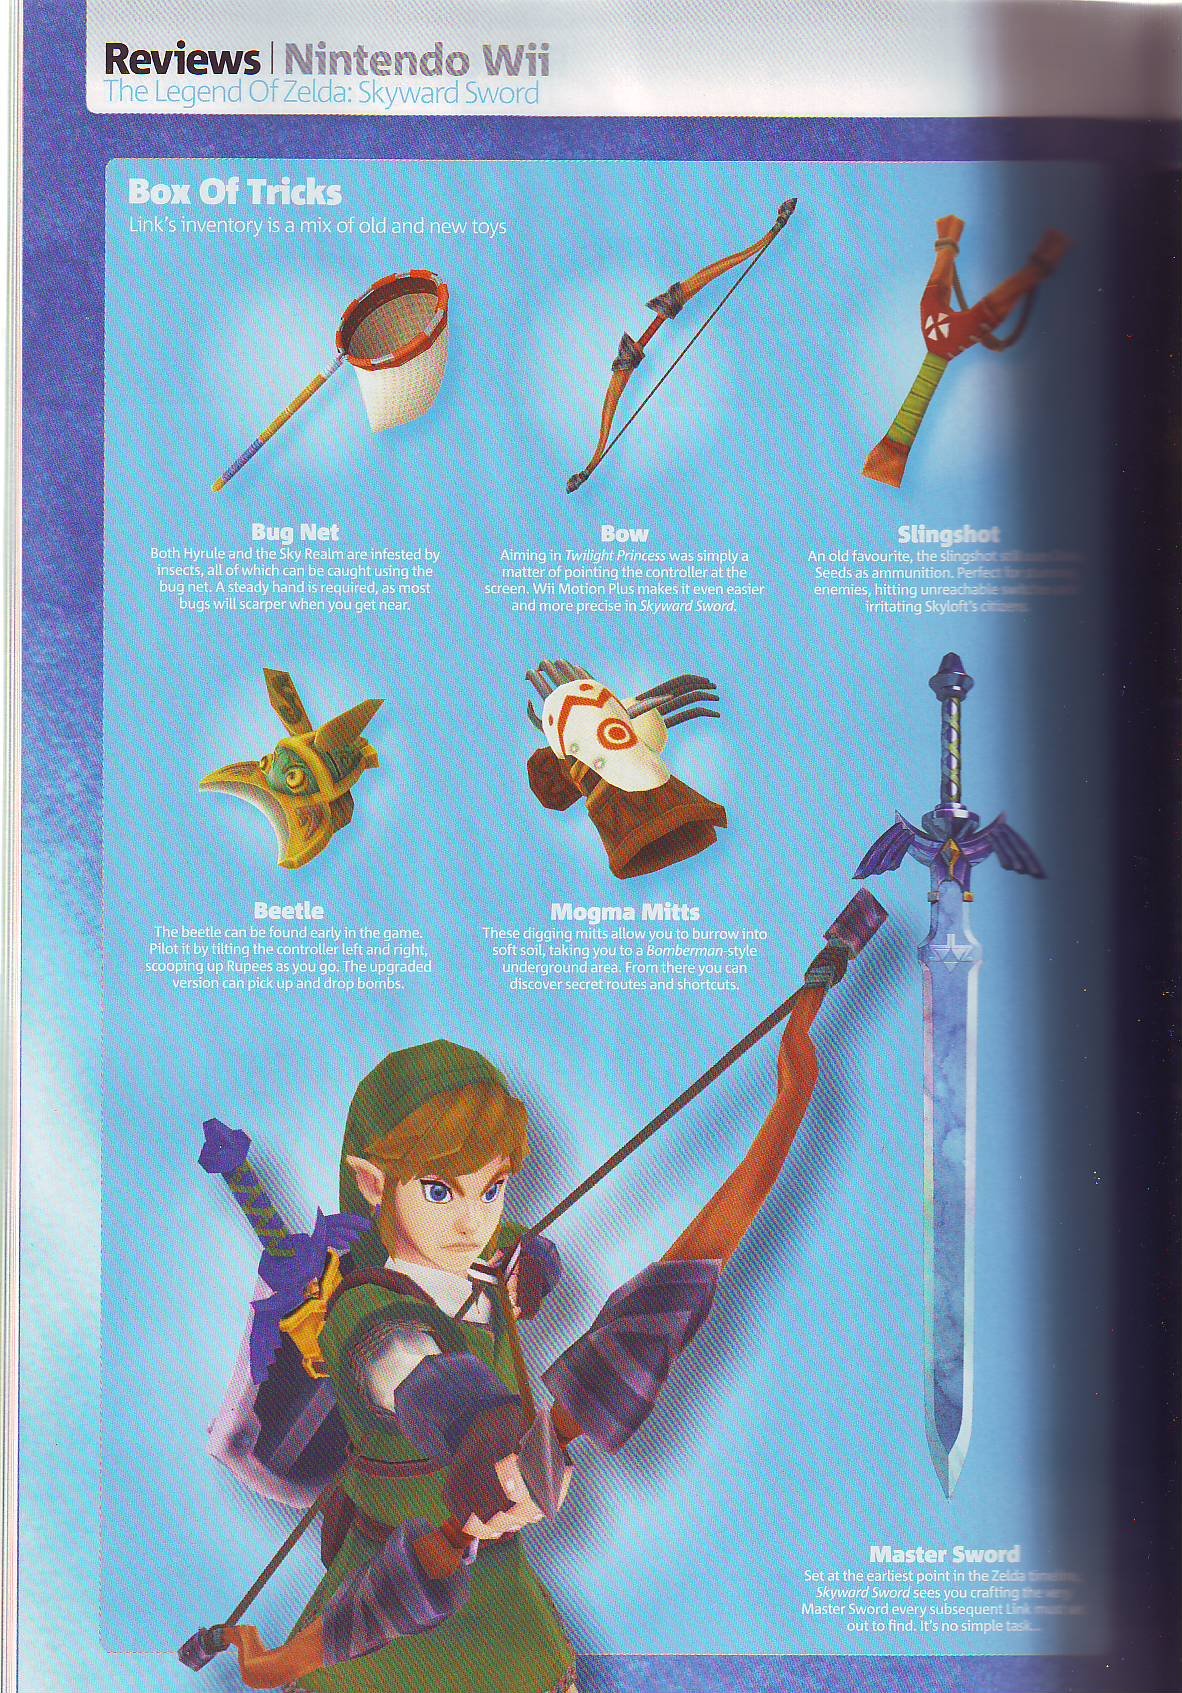 How to Get Bow in Skyward Sword 